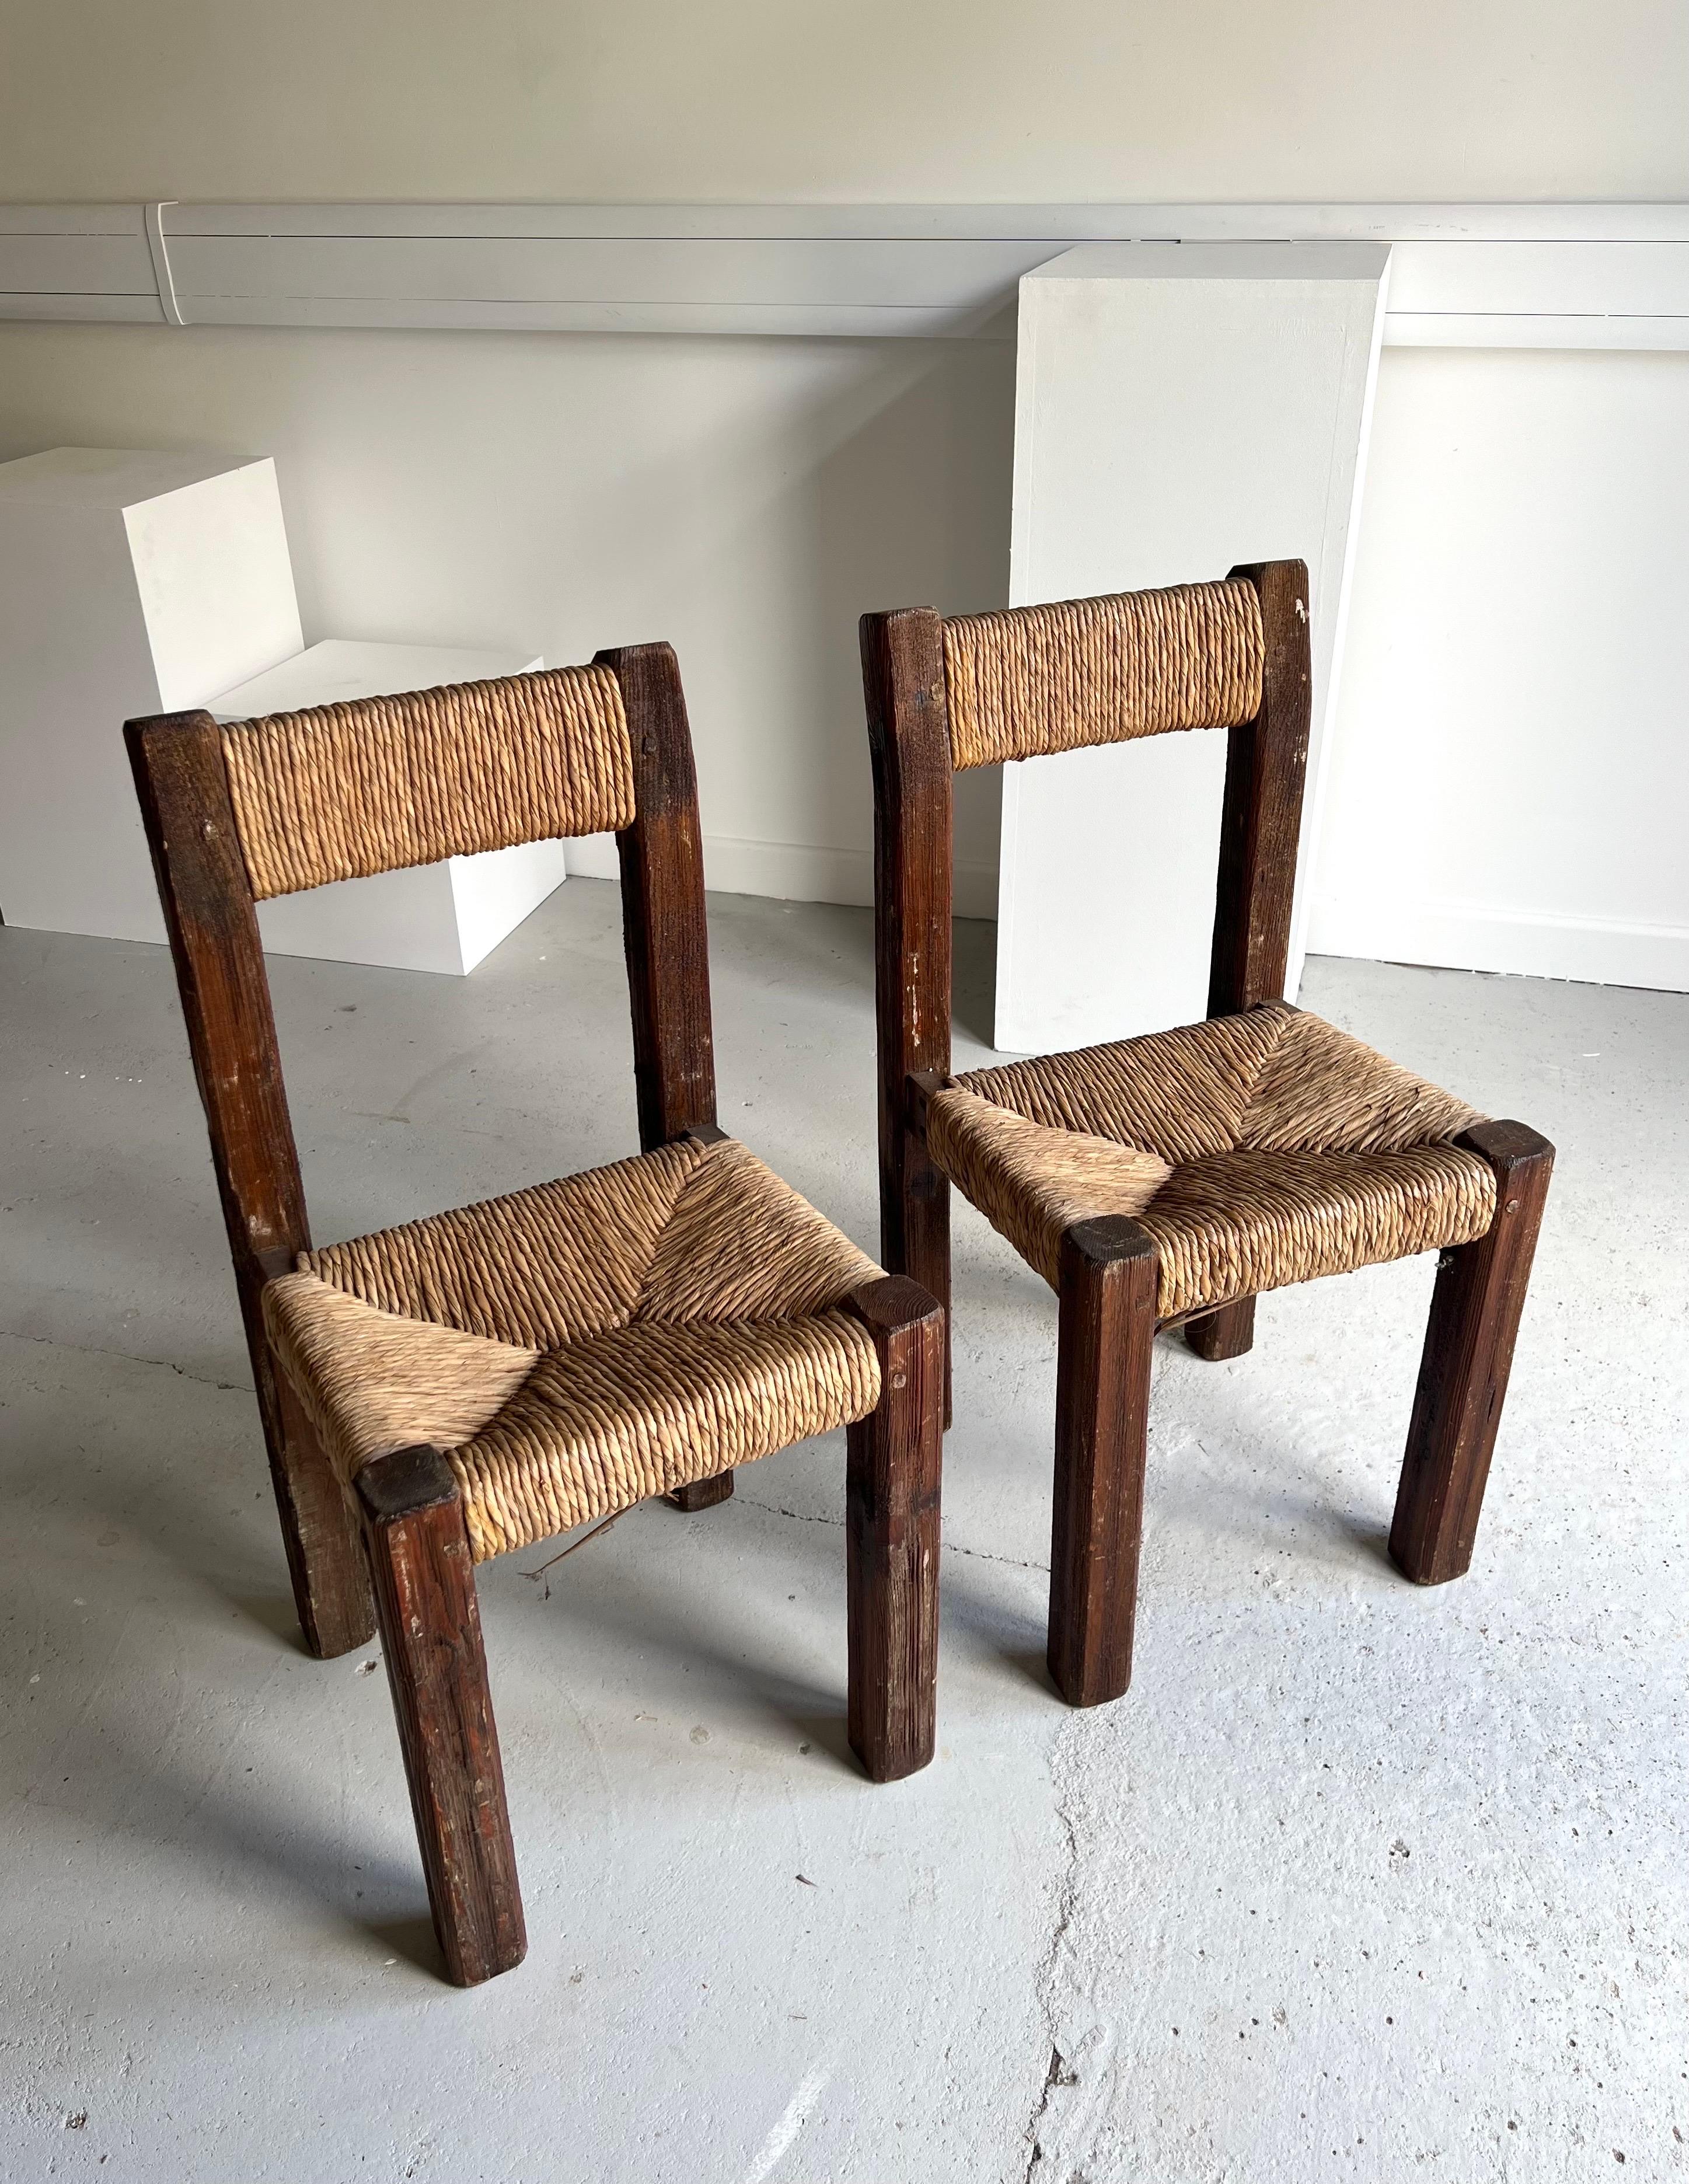 Pair of 1950s French Brutalist solid pine and straw chairs.  A rustic pair with rich texture, they would look fabulous in a classic or contemporary setting.  

There is some general wear however they remain structurally sturdy and the rush is in